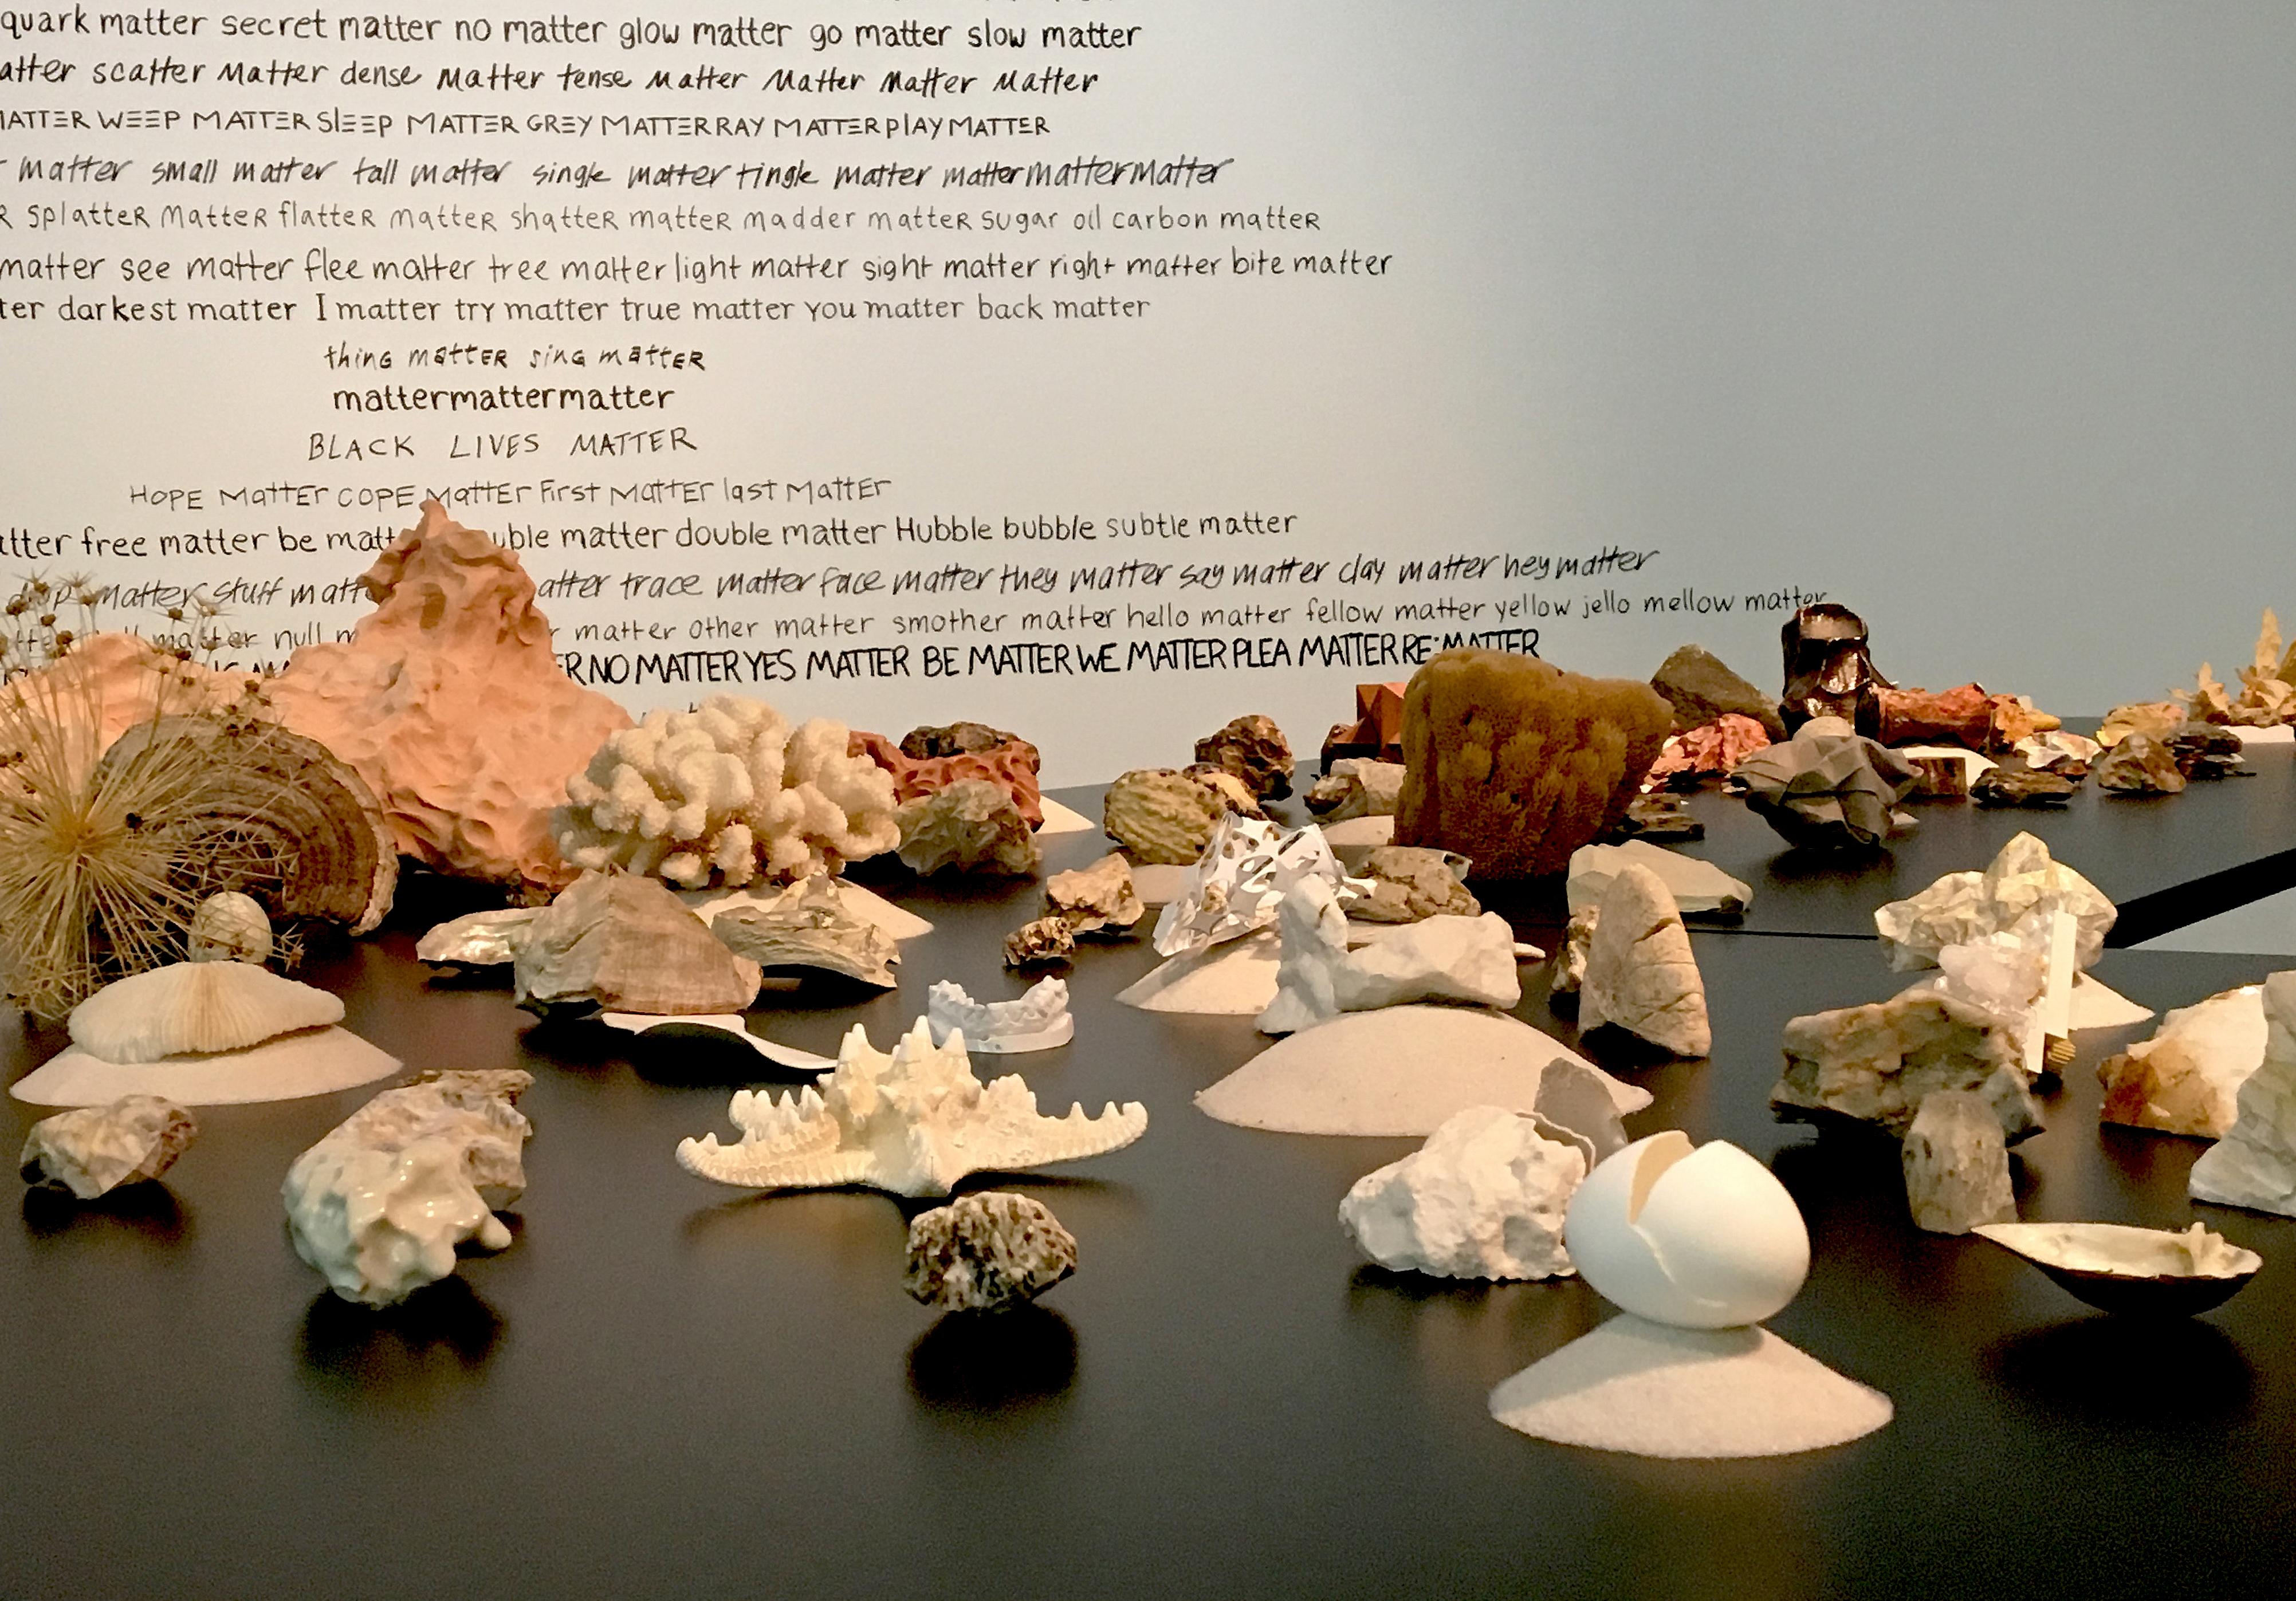 A table with rocks, minerals, and other substances sits in front of a wall covered with black text.